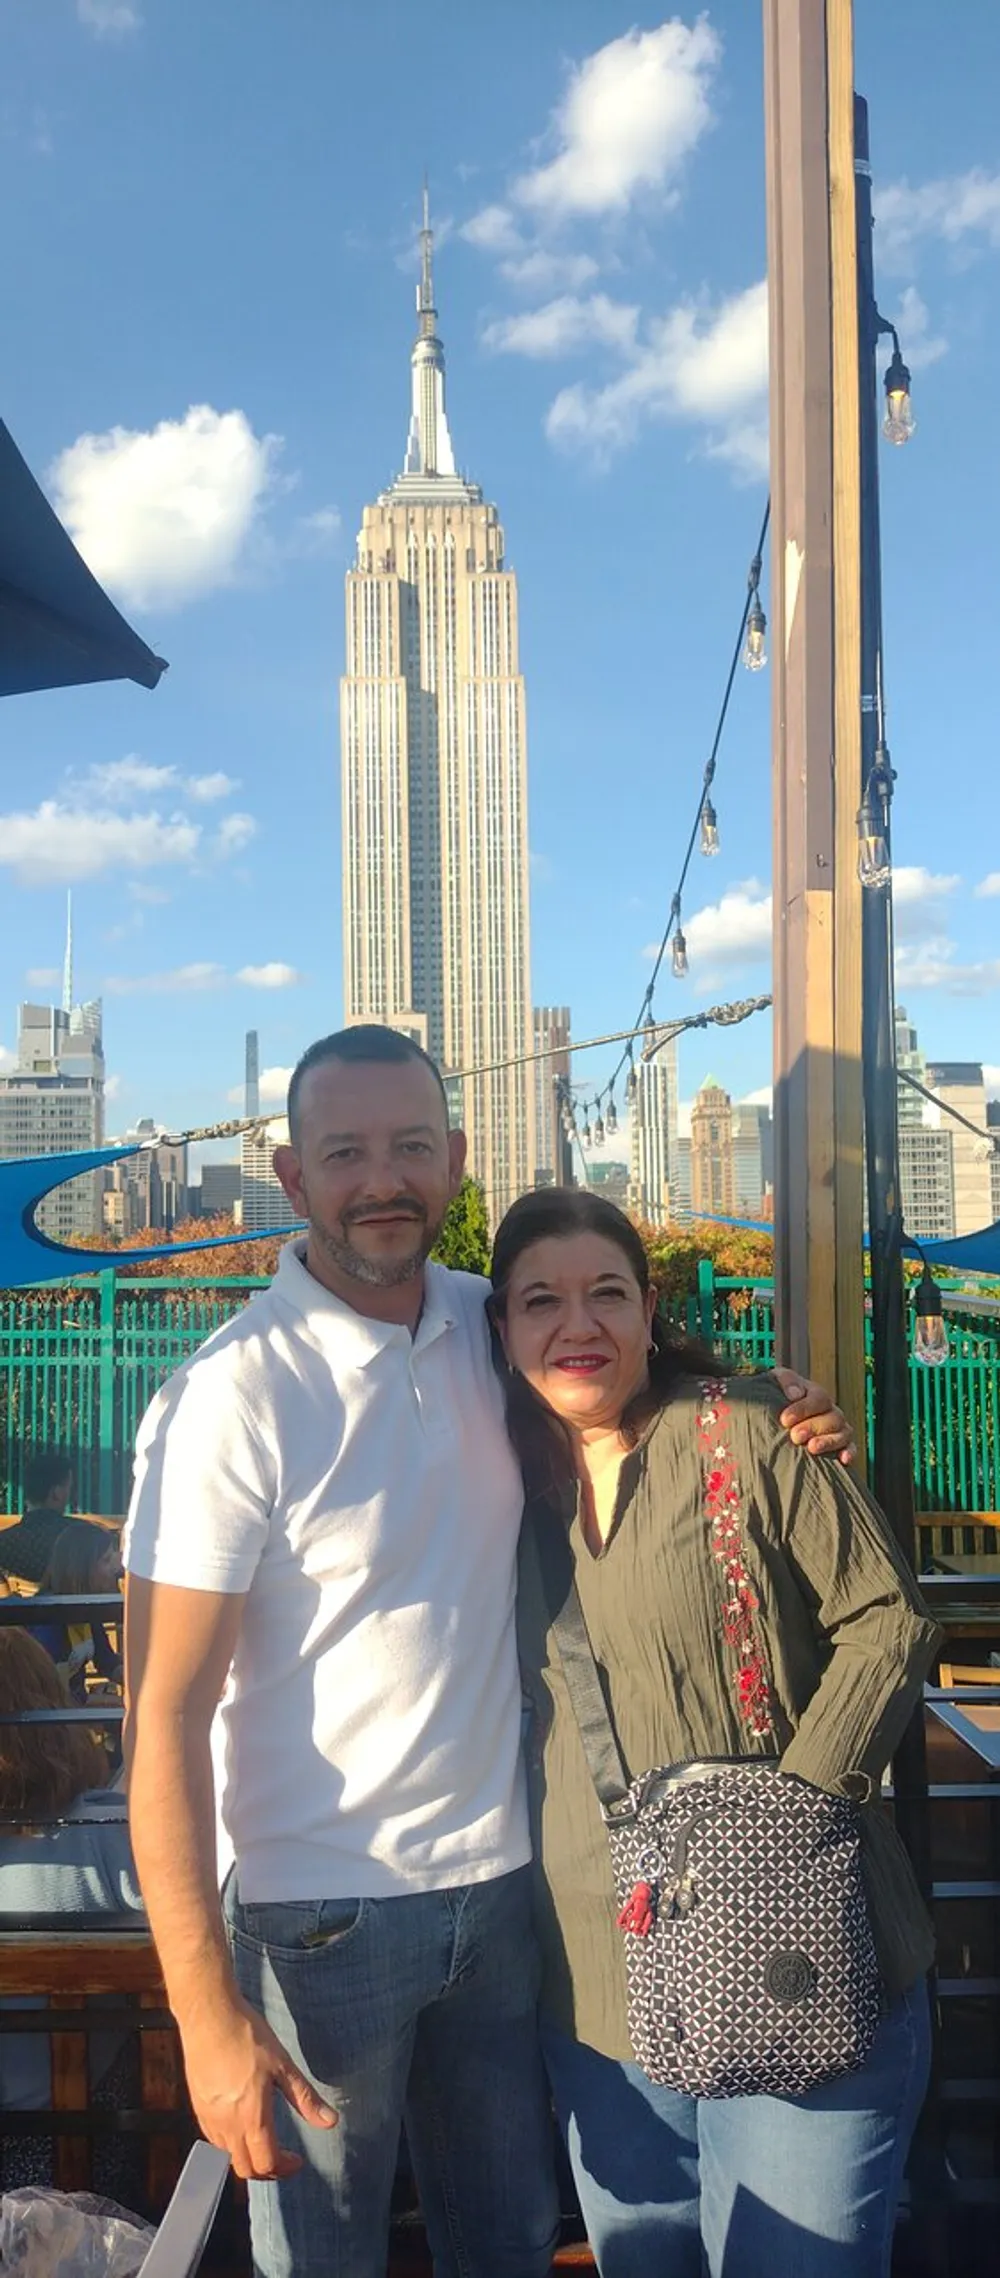 A man and a woman are smiling for a photo with the Empire State Building in the background under a sunny sky